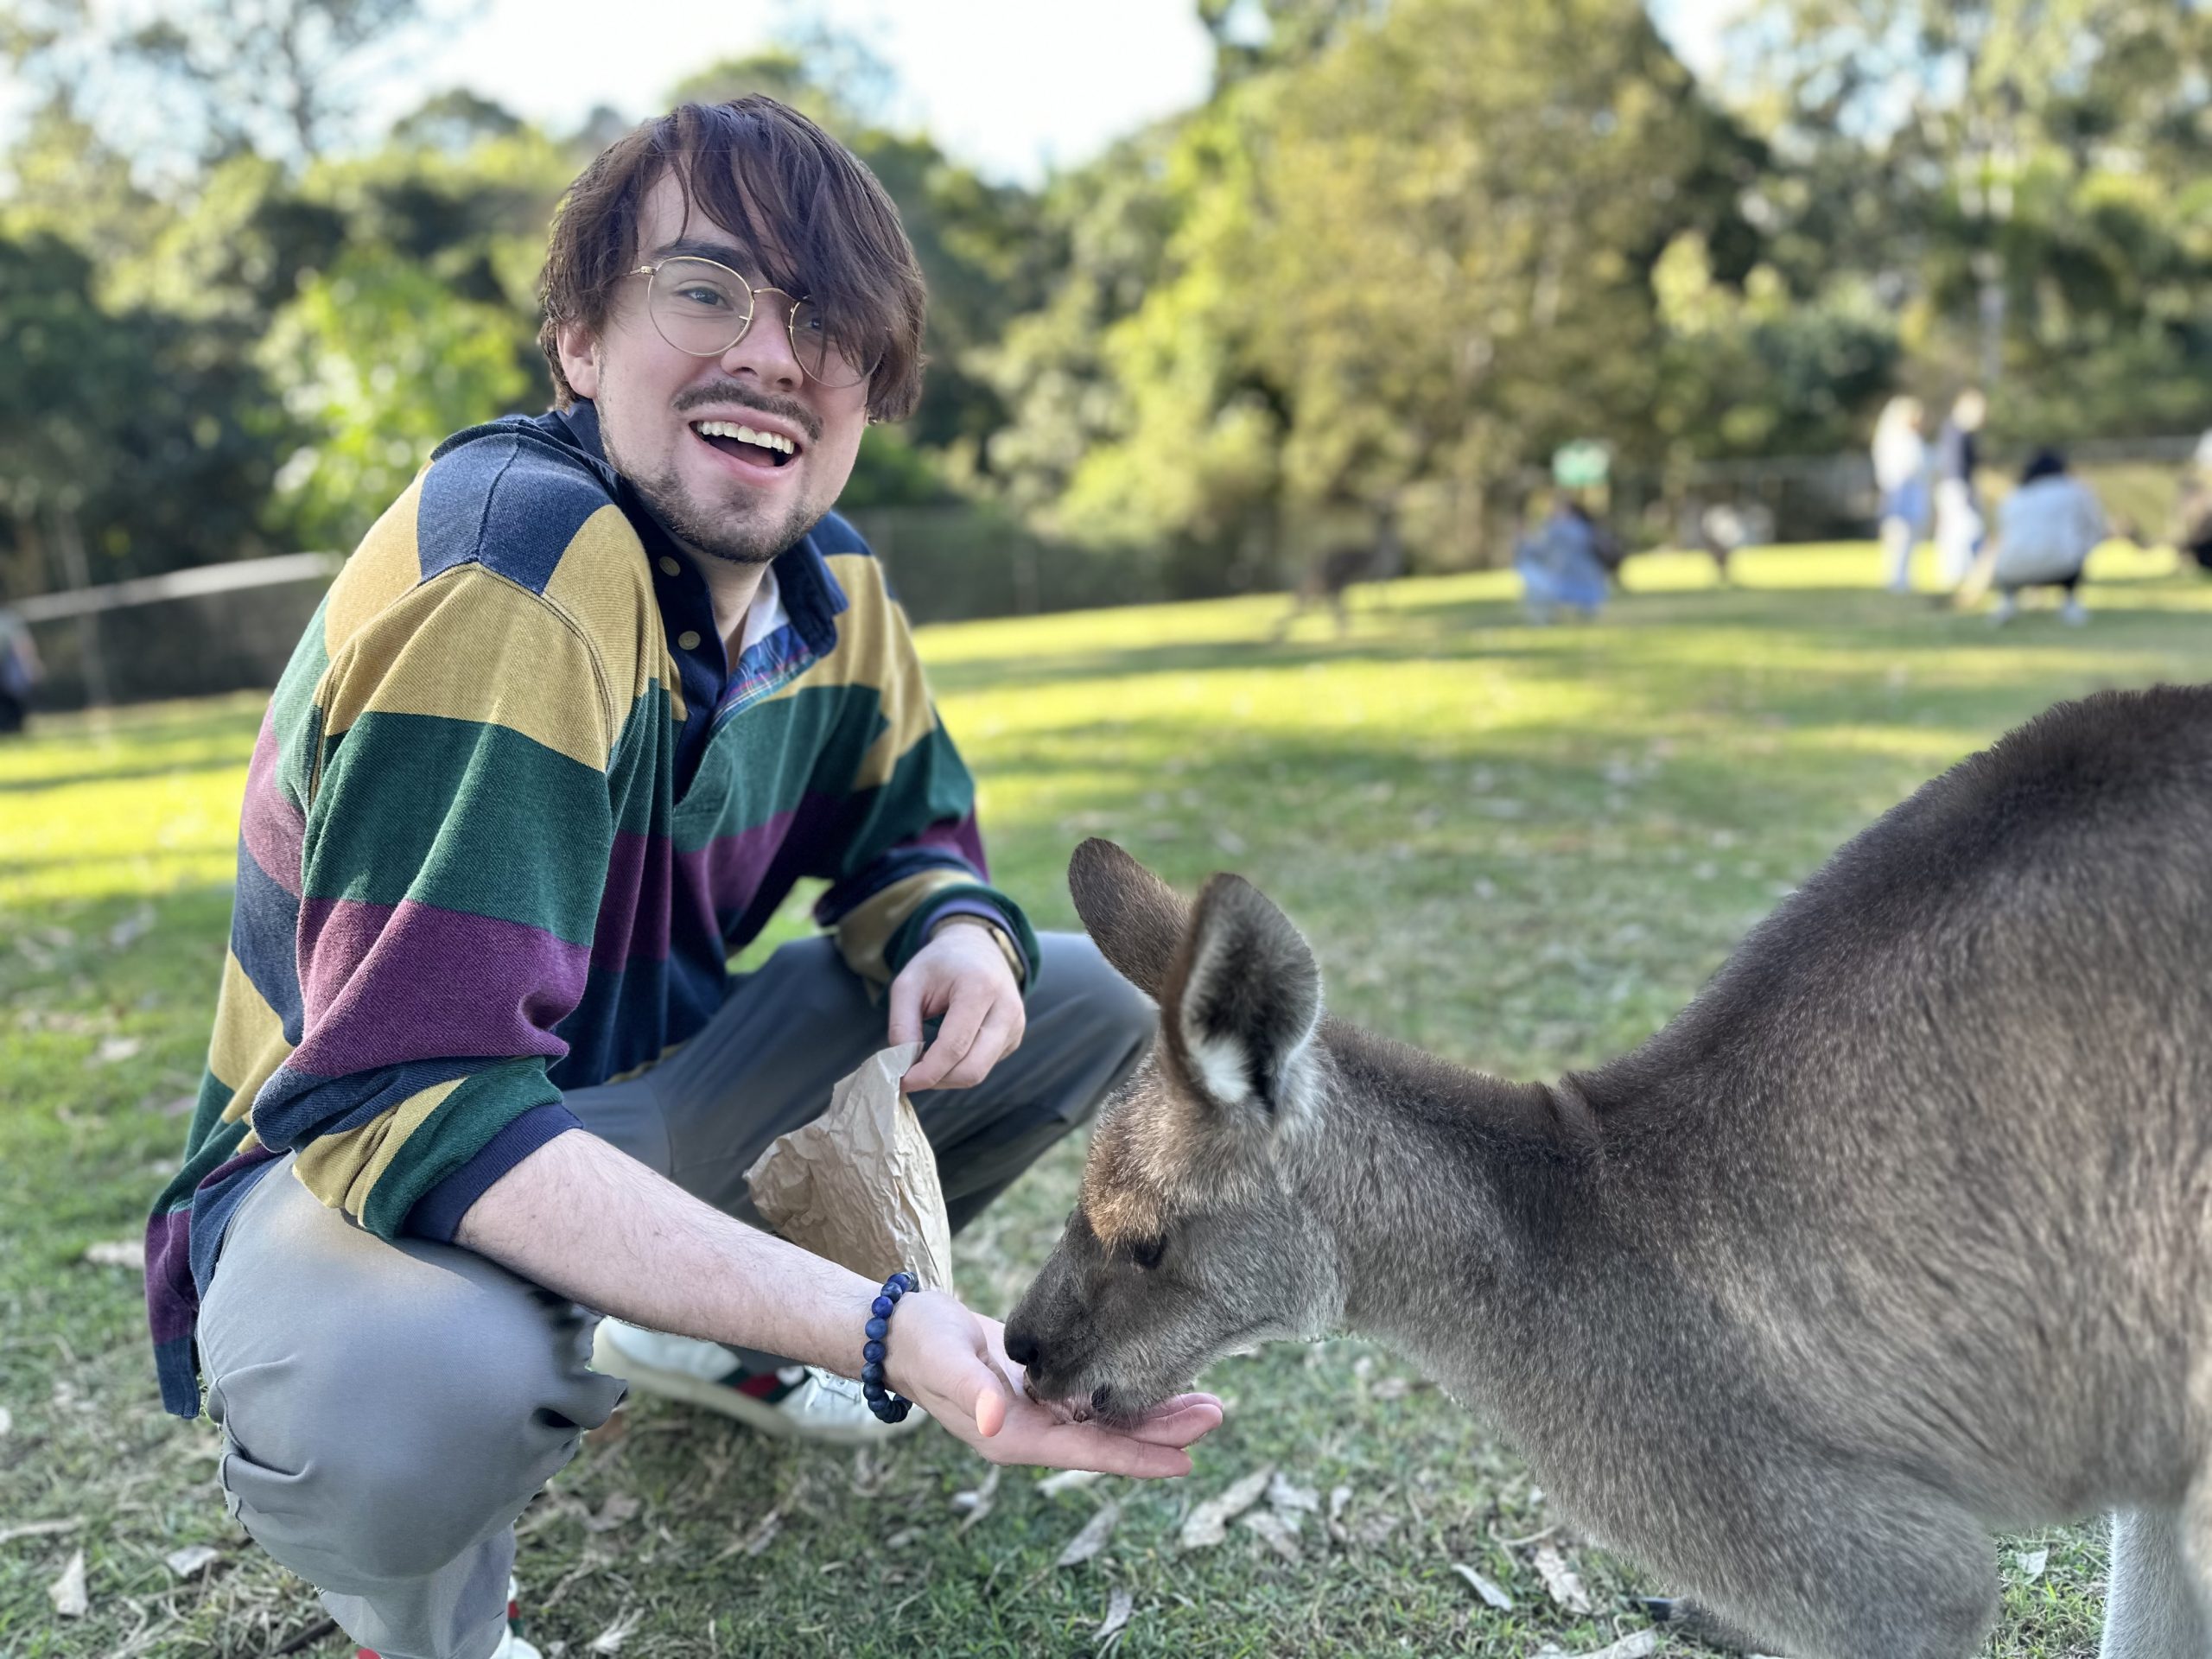 Adrian Rogers feeds a kangaroo at the Lone Pine Koala Sanctuary while studying abroad in Australia.